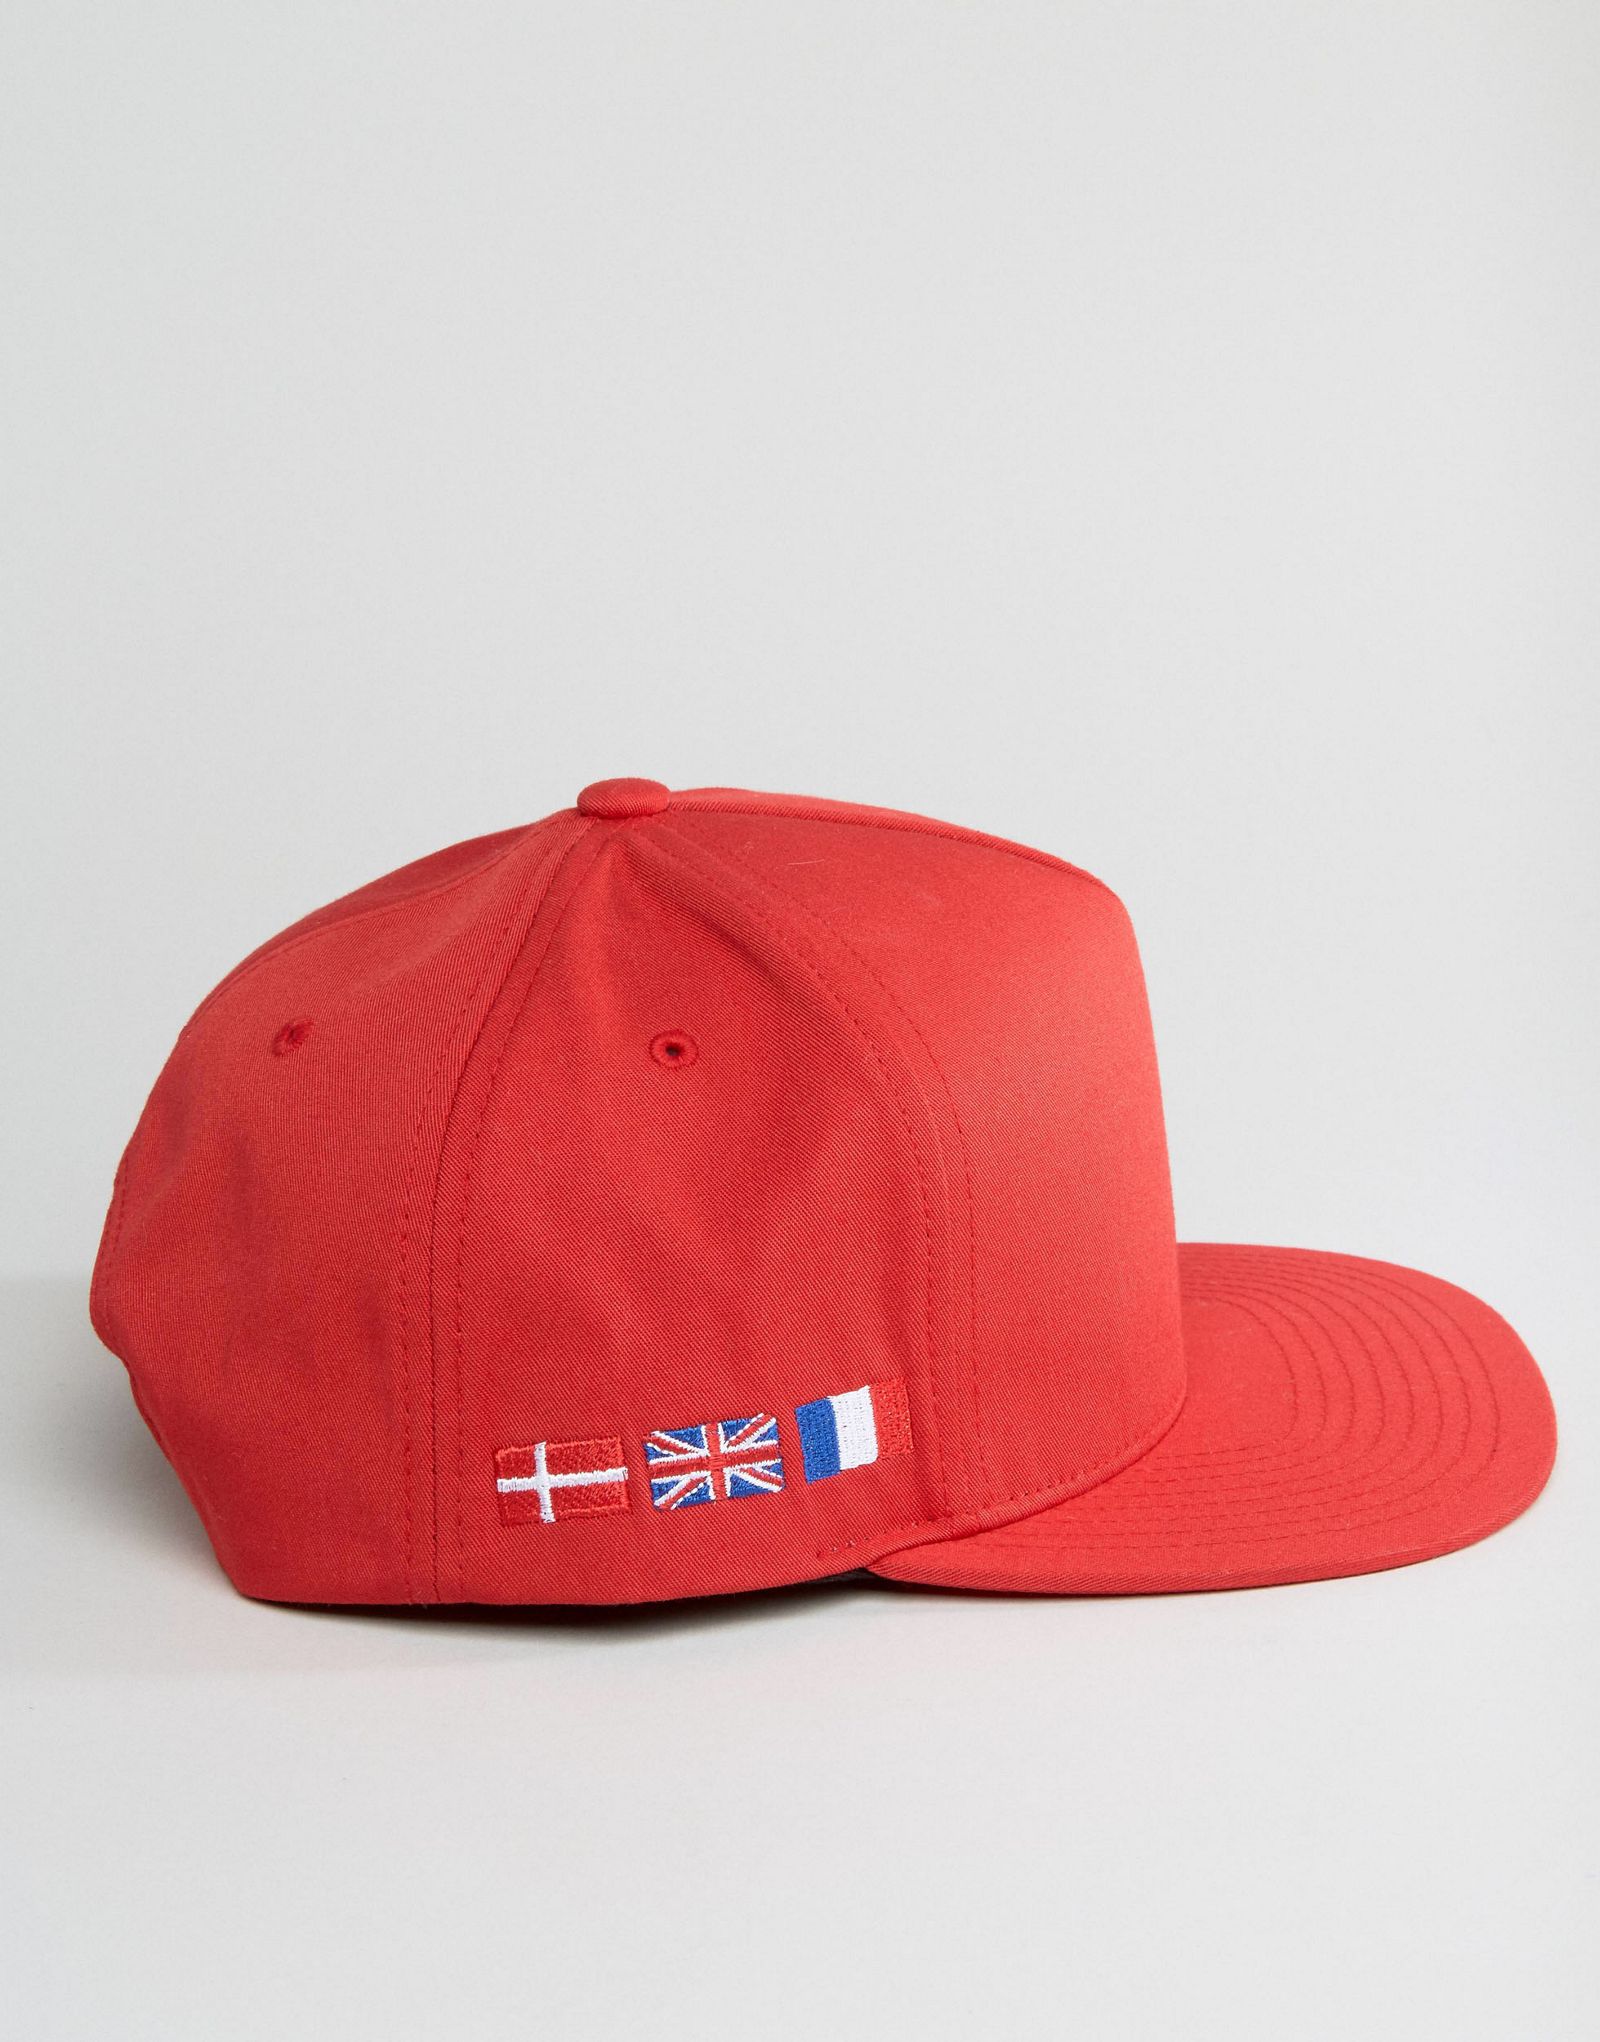 HUF x Thrasher Snapback Cap with Embroidered Side Art